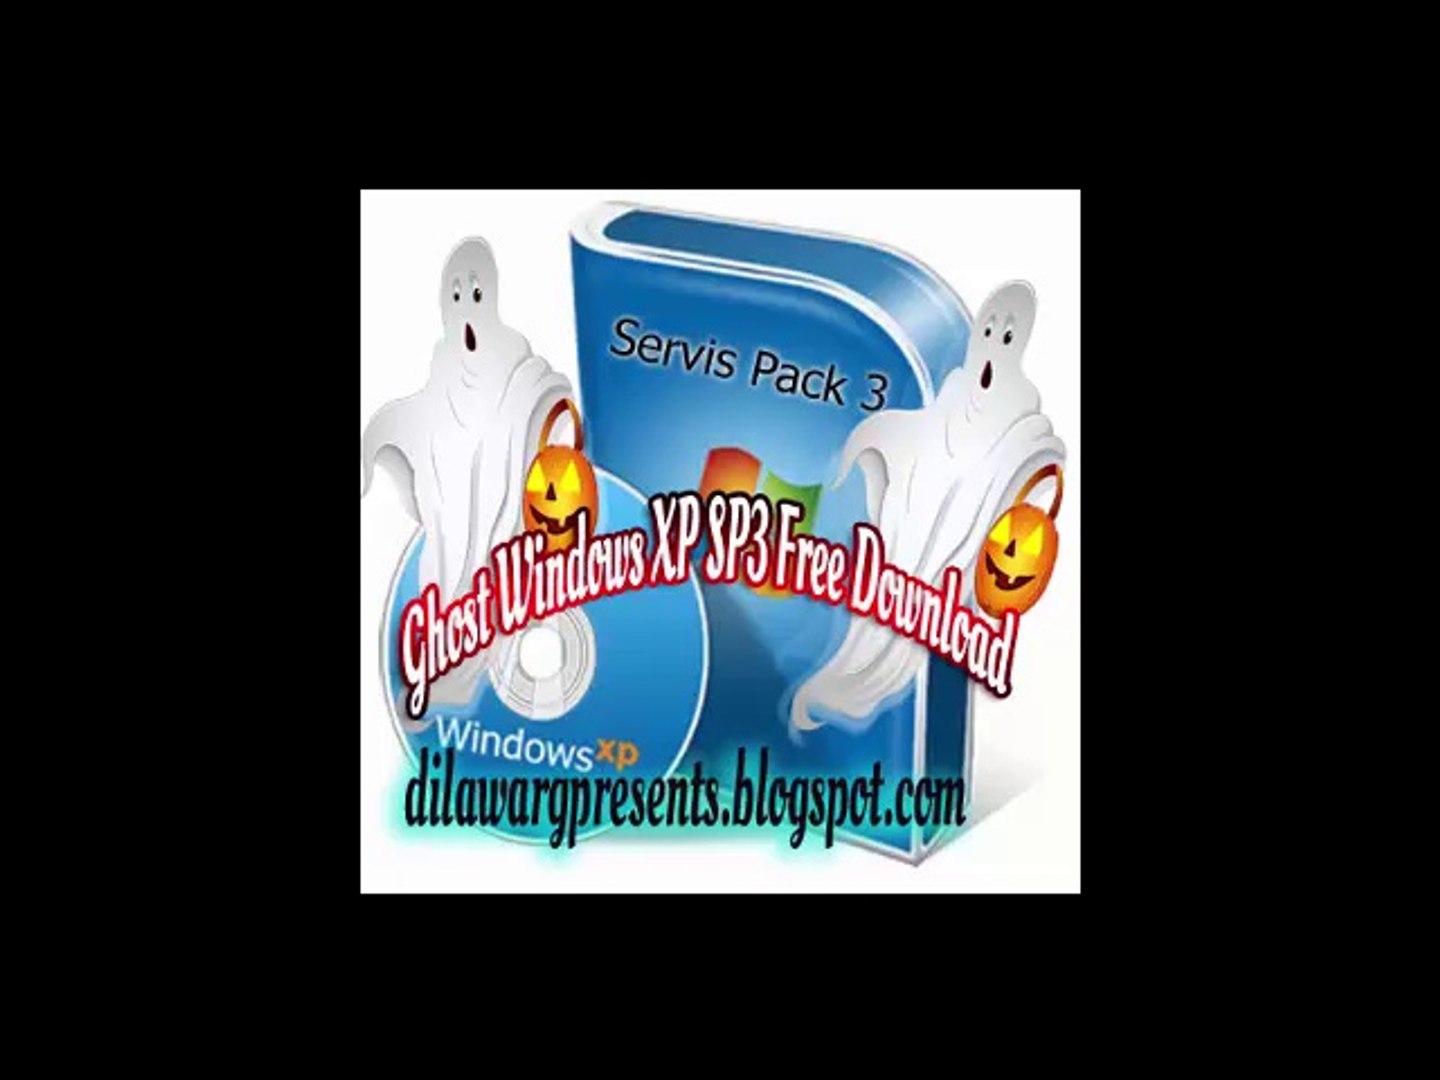 Ghost xp sp3 free download